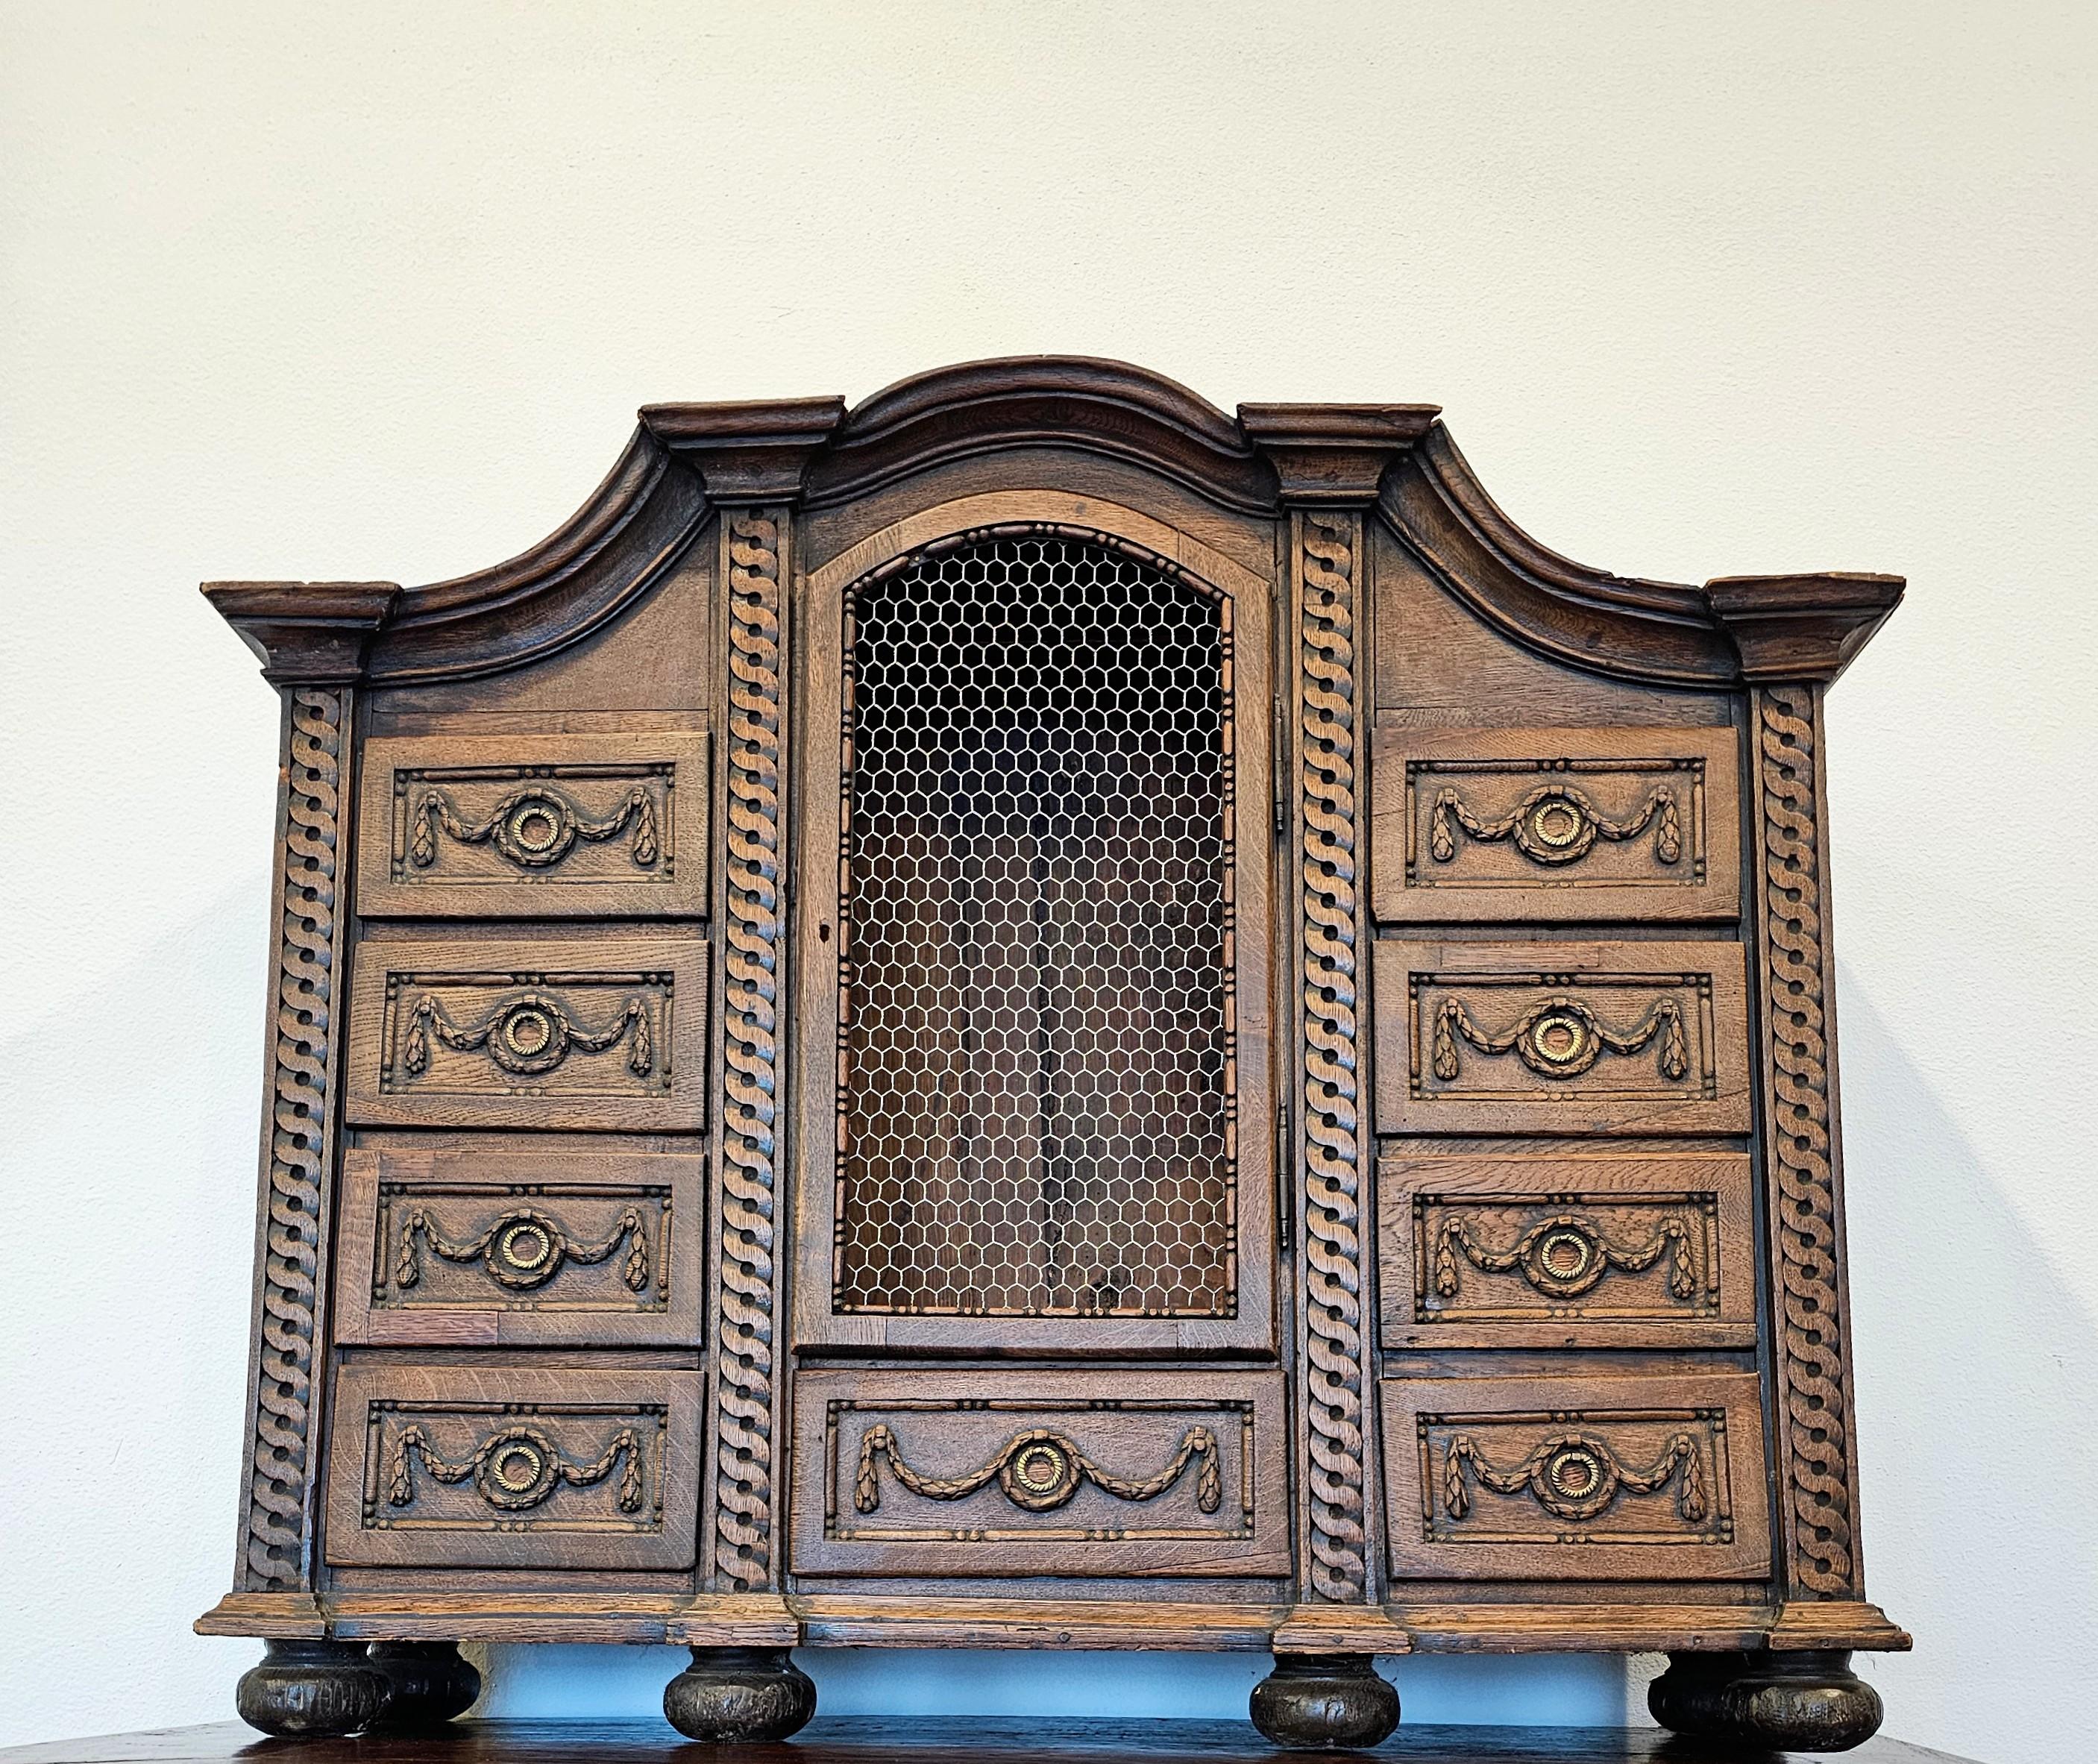 A rustic antique French Baroque carved oak tabernacle curiosity cabinet, 18th century or earlier, having an architectural form with elaborate molded cornice, over central niche, surrounded by nine drawers with hand-cut dovetail joinery, Neoclassical